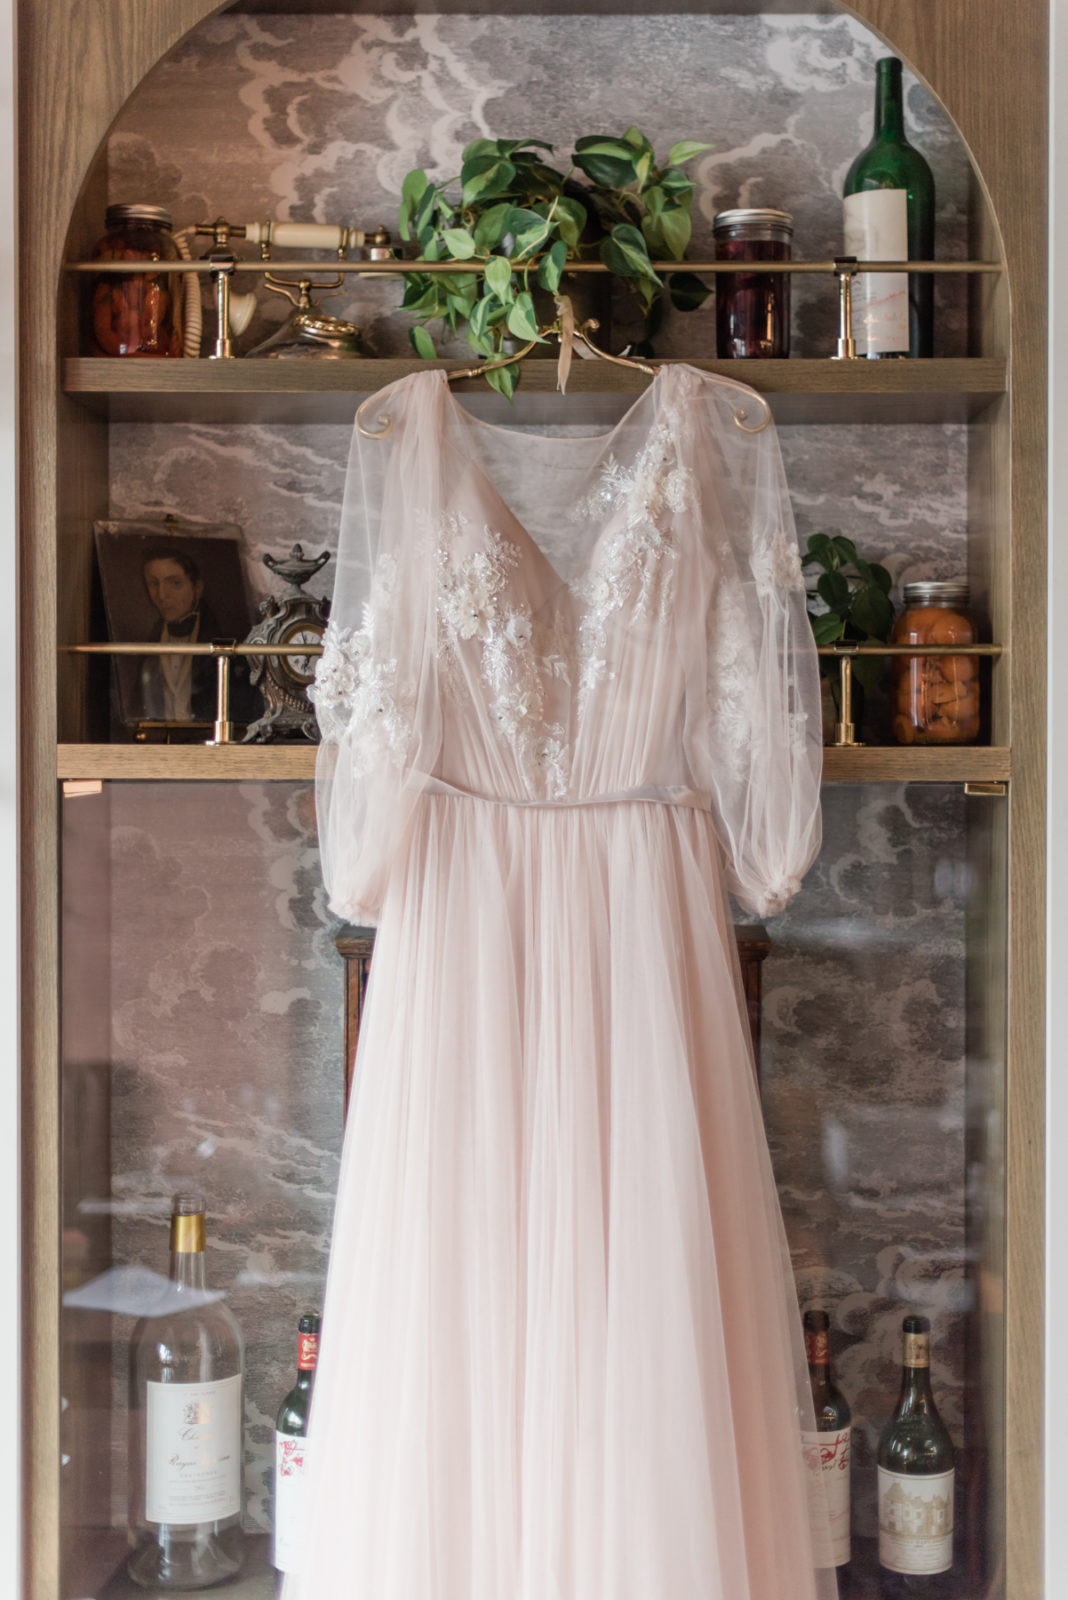 Romantically Regal Bridal Inspiration at the Royale YYC - wedding inspiration featured on Brontë Bride, wedding dress, wedding dress inspiration